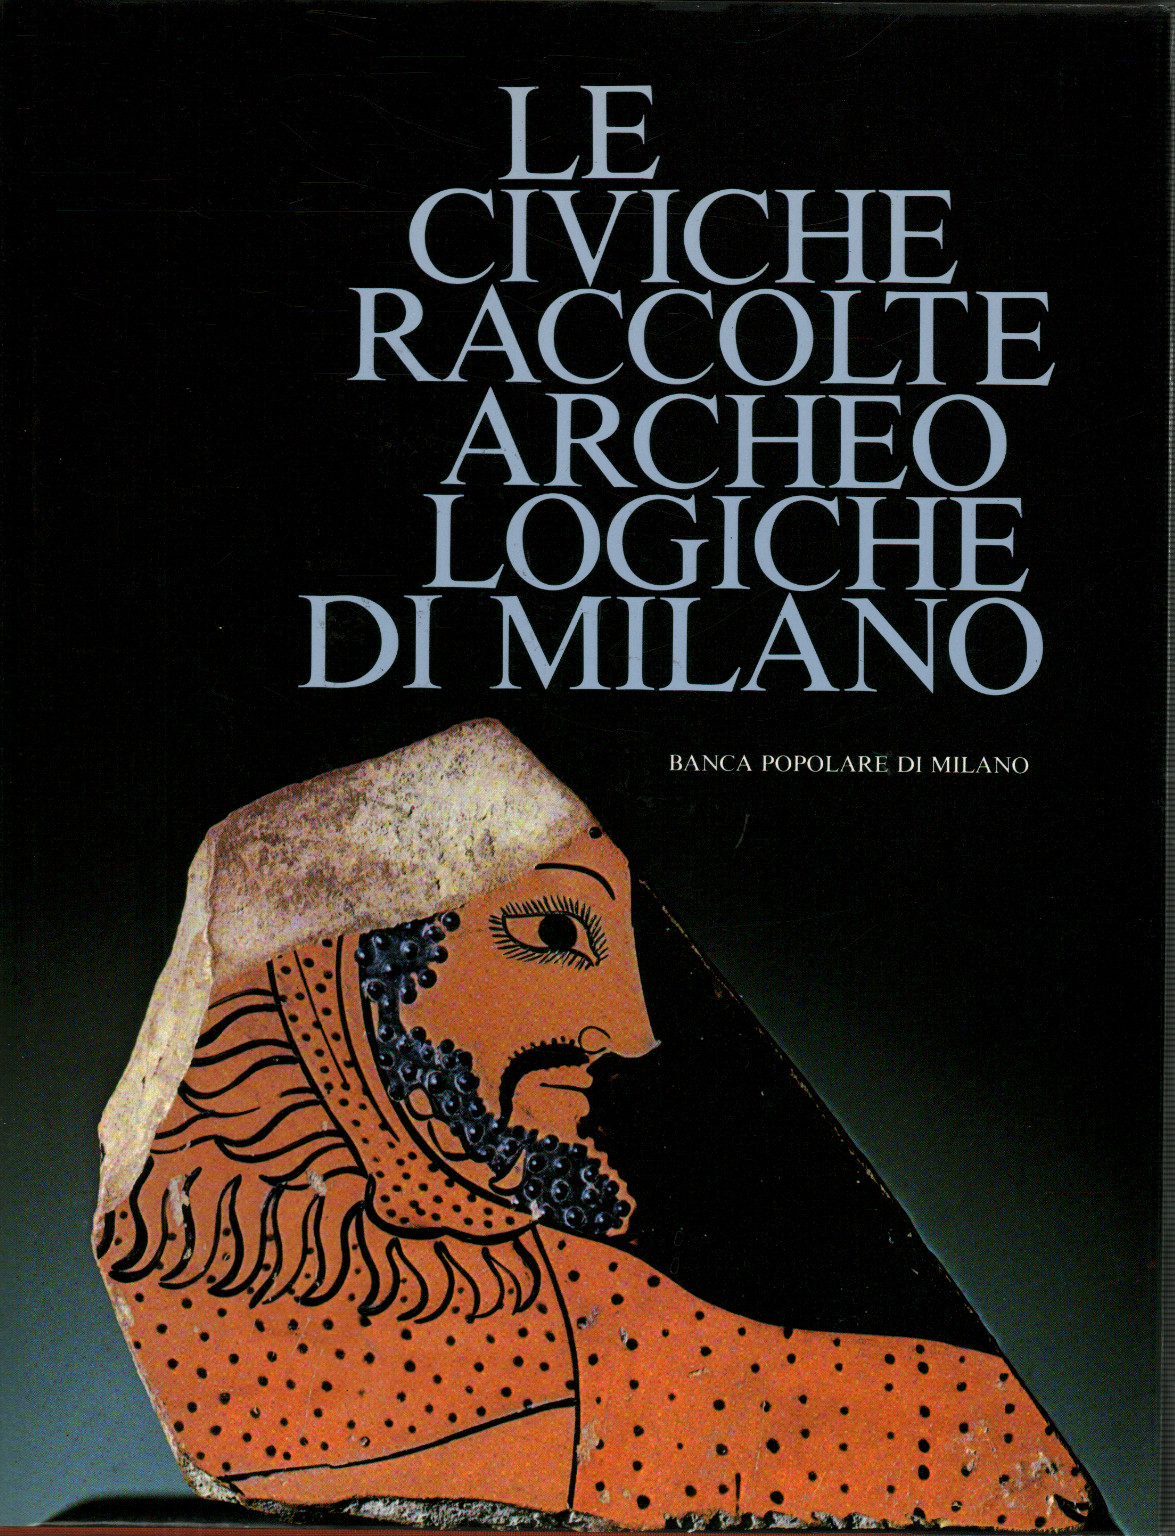 The civic archaeological collections of Milan, s.a.